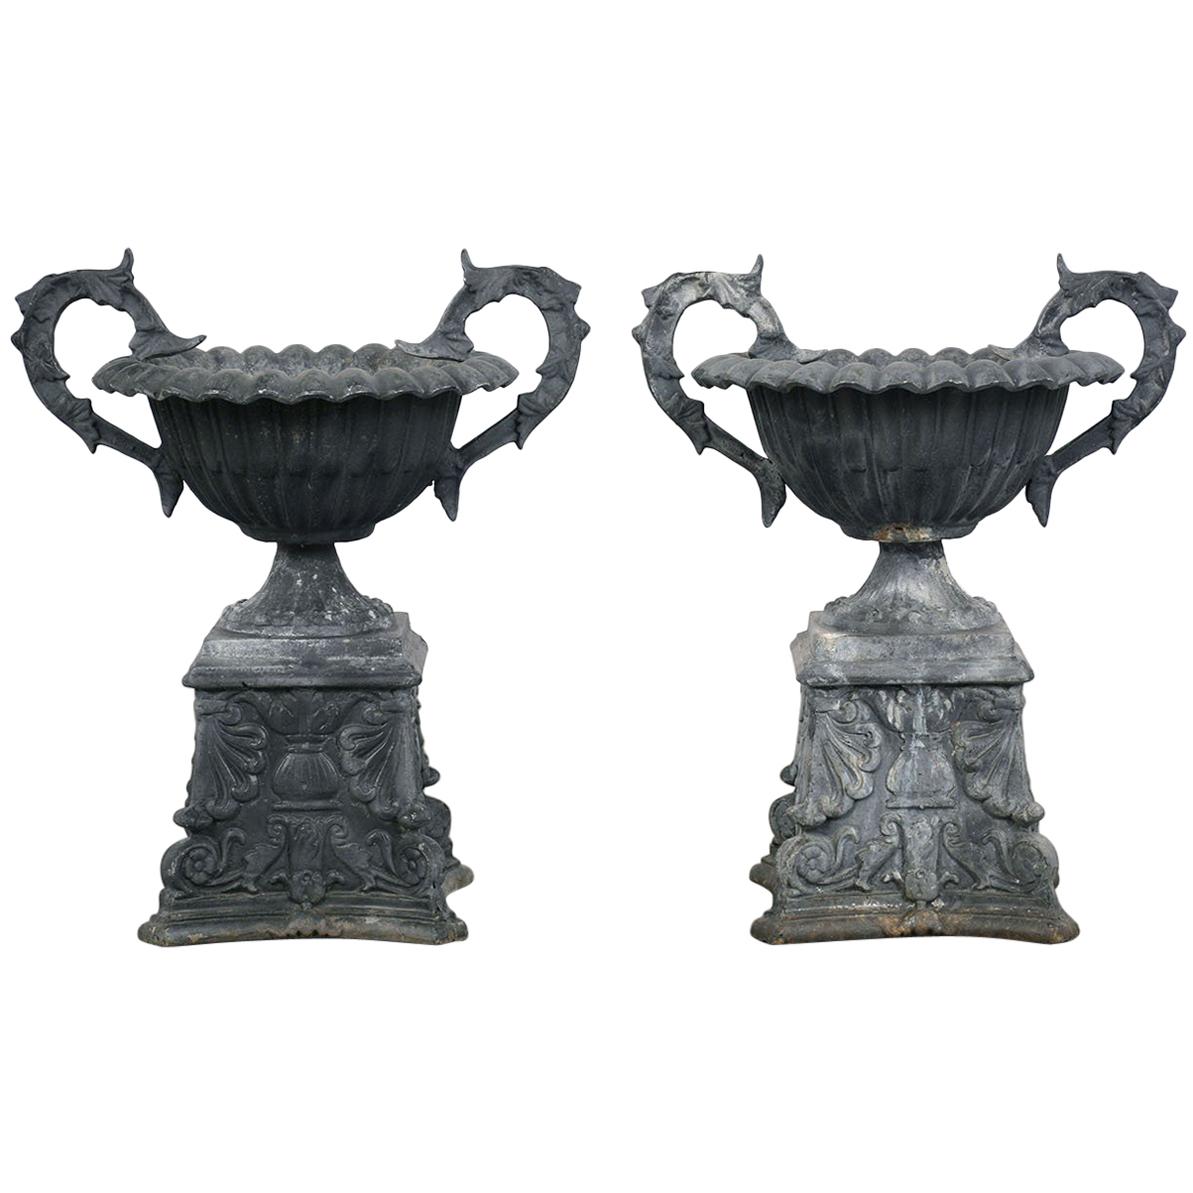 Pair of Neoclassical Style Urns Outdoor Planters